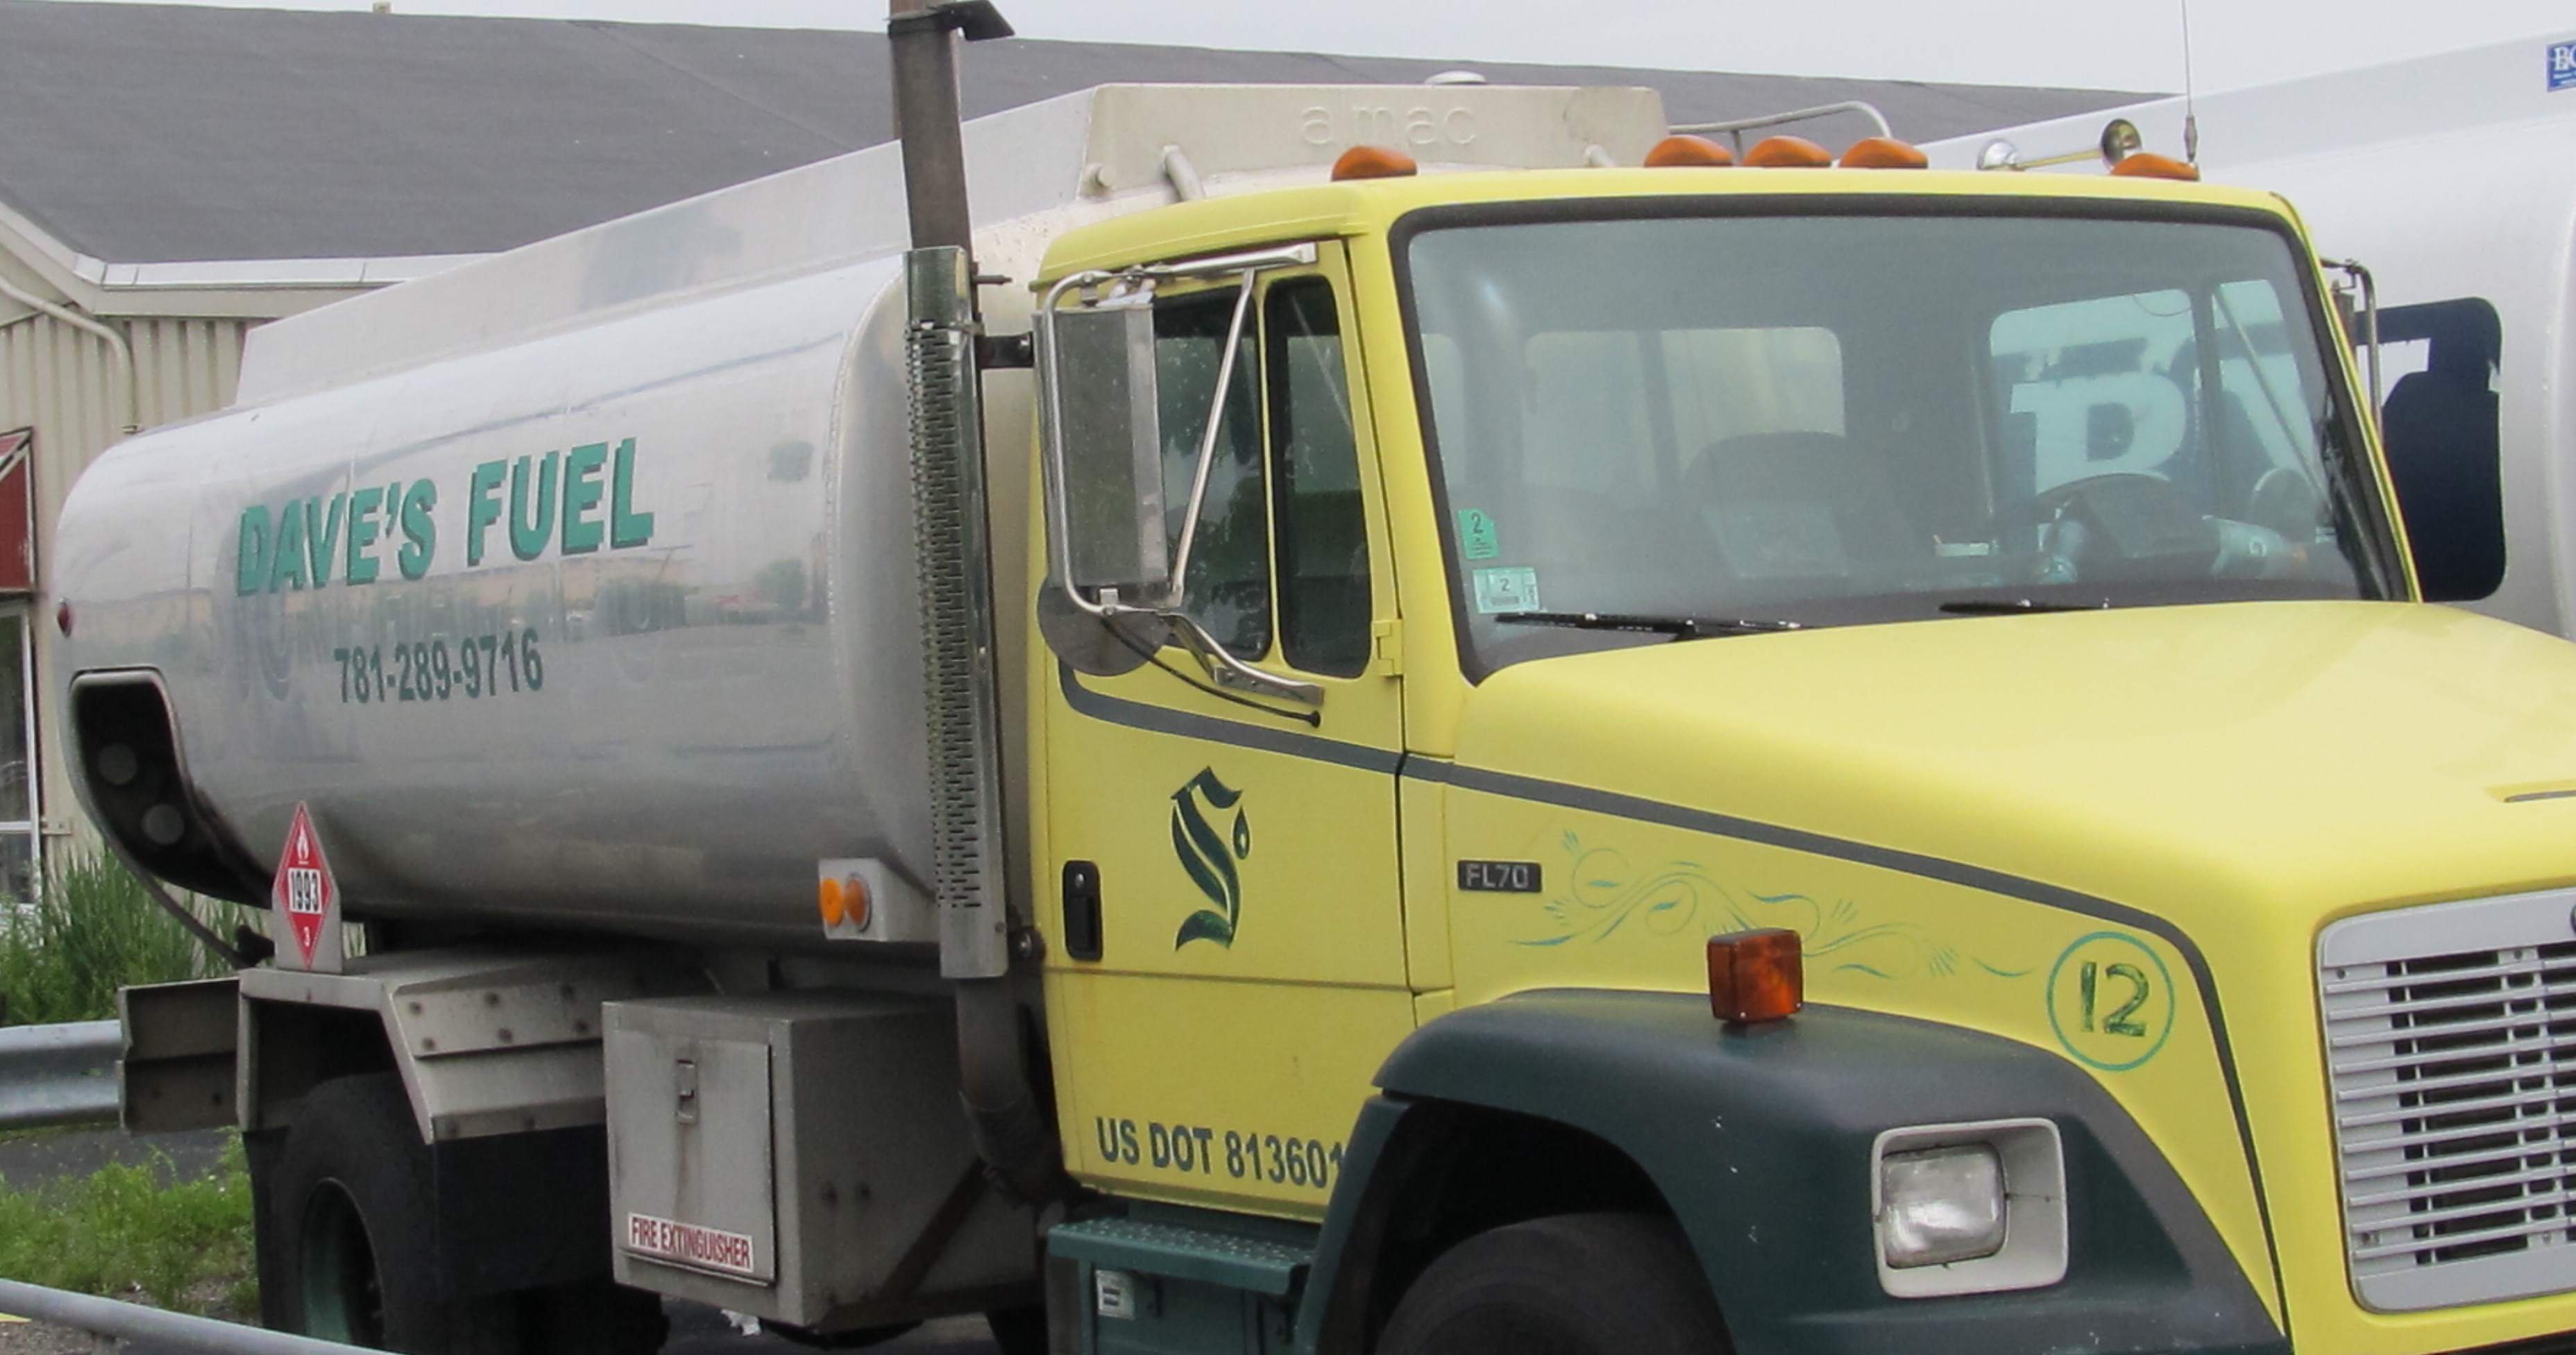 Heating Oil,Automatic Delivery,Burner Service, Installations--24 Hour Emergency Service